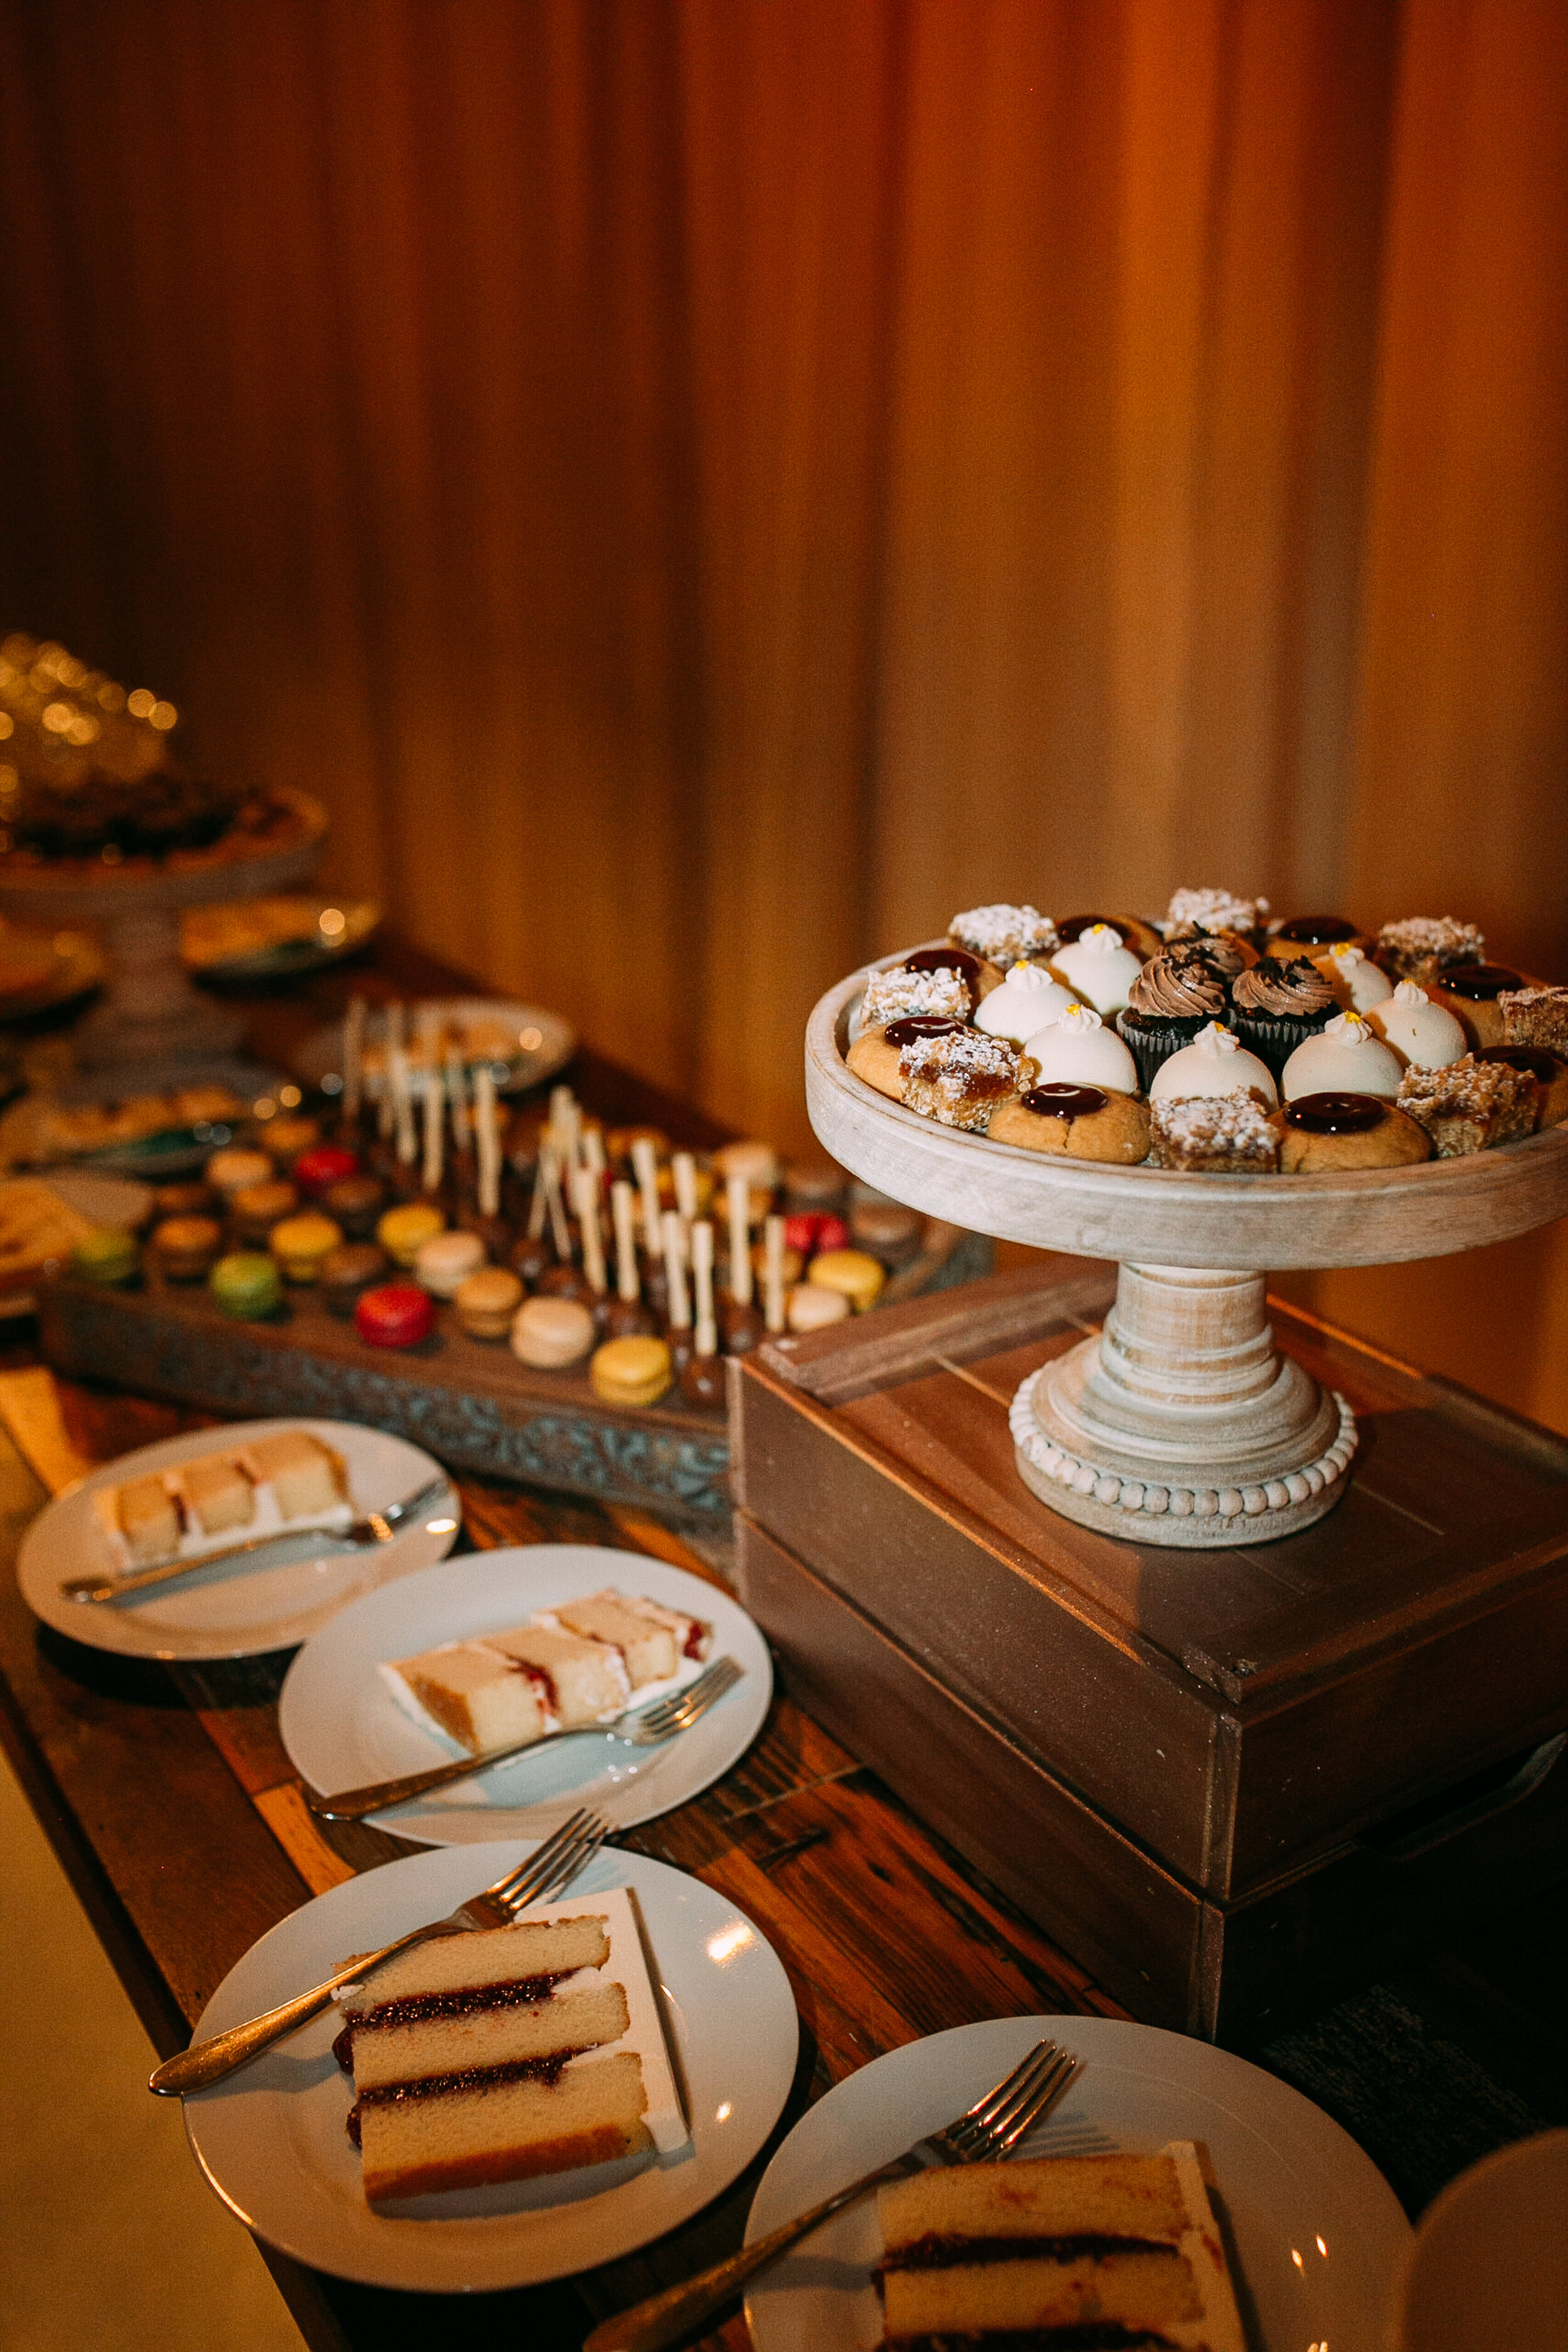 Wedding dessert table display: Modern Chicago wedding at Ovation captured by This Is Feeling Photography. Find more Chicago wedding inspiration at CHItheeWED.com!